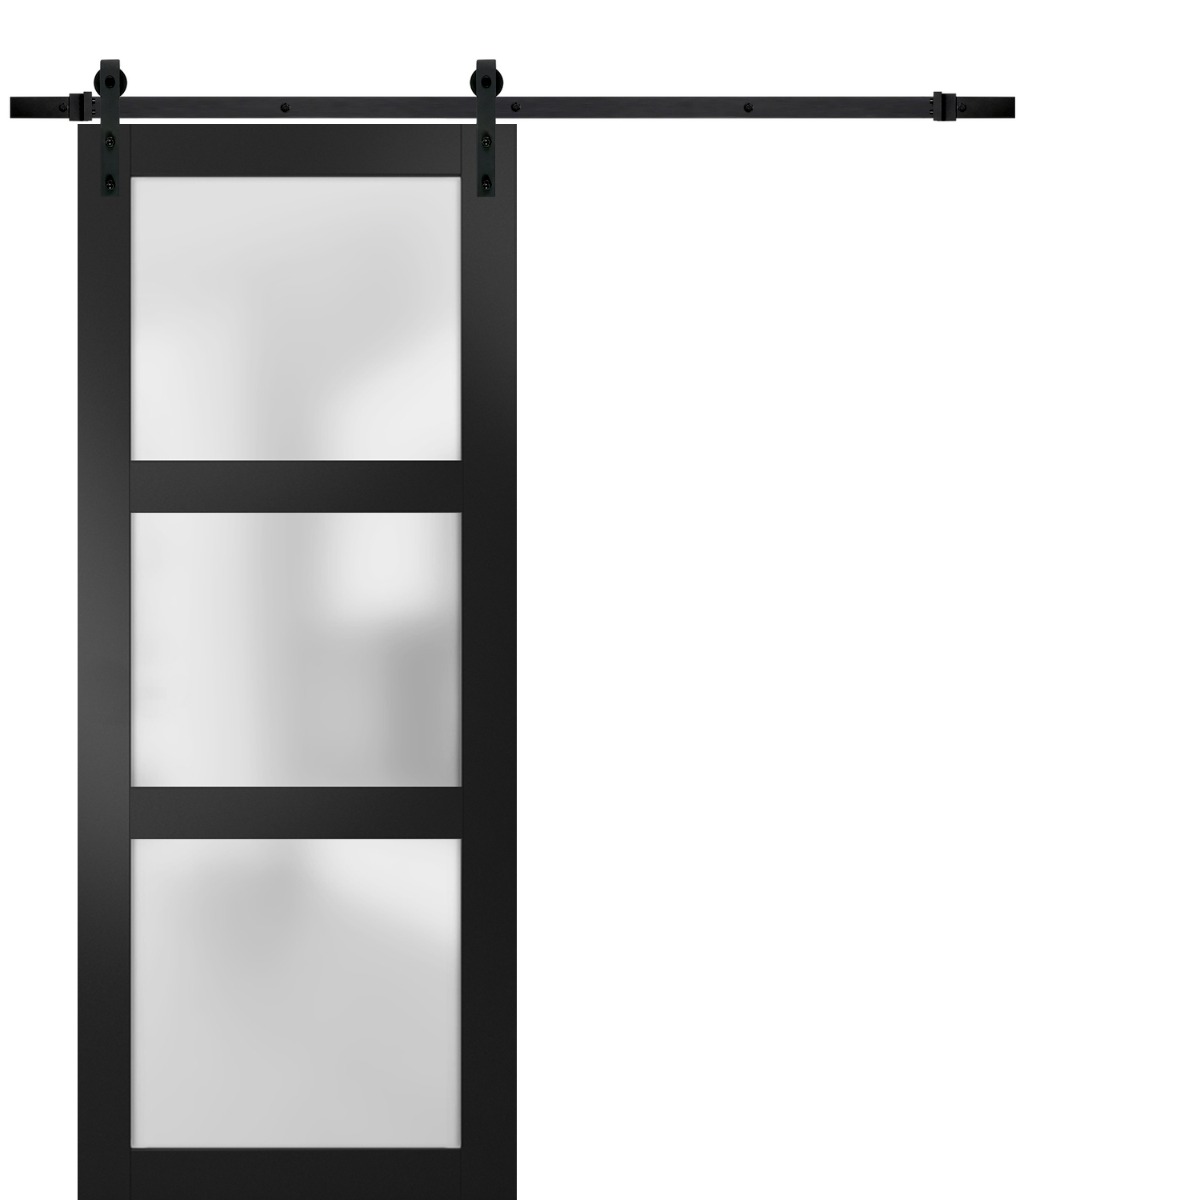 Sturdy Barn Door Frosted Glass | Lucia 2552 Matte Black | 6.6FT Rail Hangers Heavy Hardware Set | Solid Panel Interior Doors-36